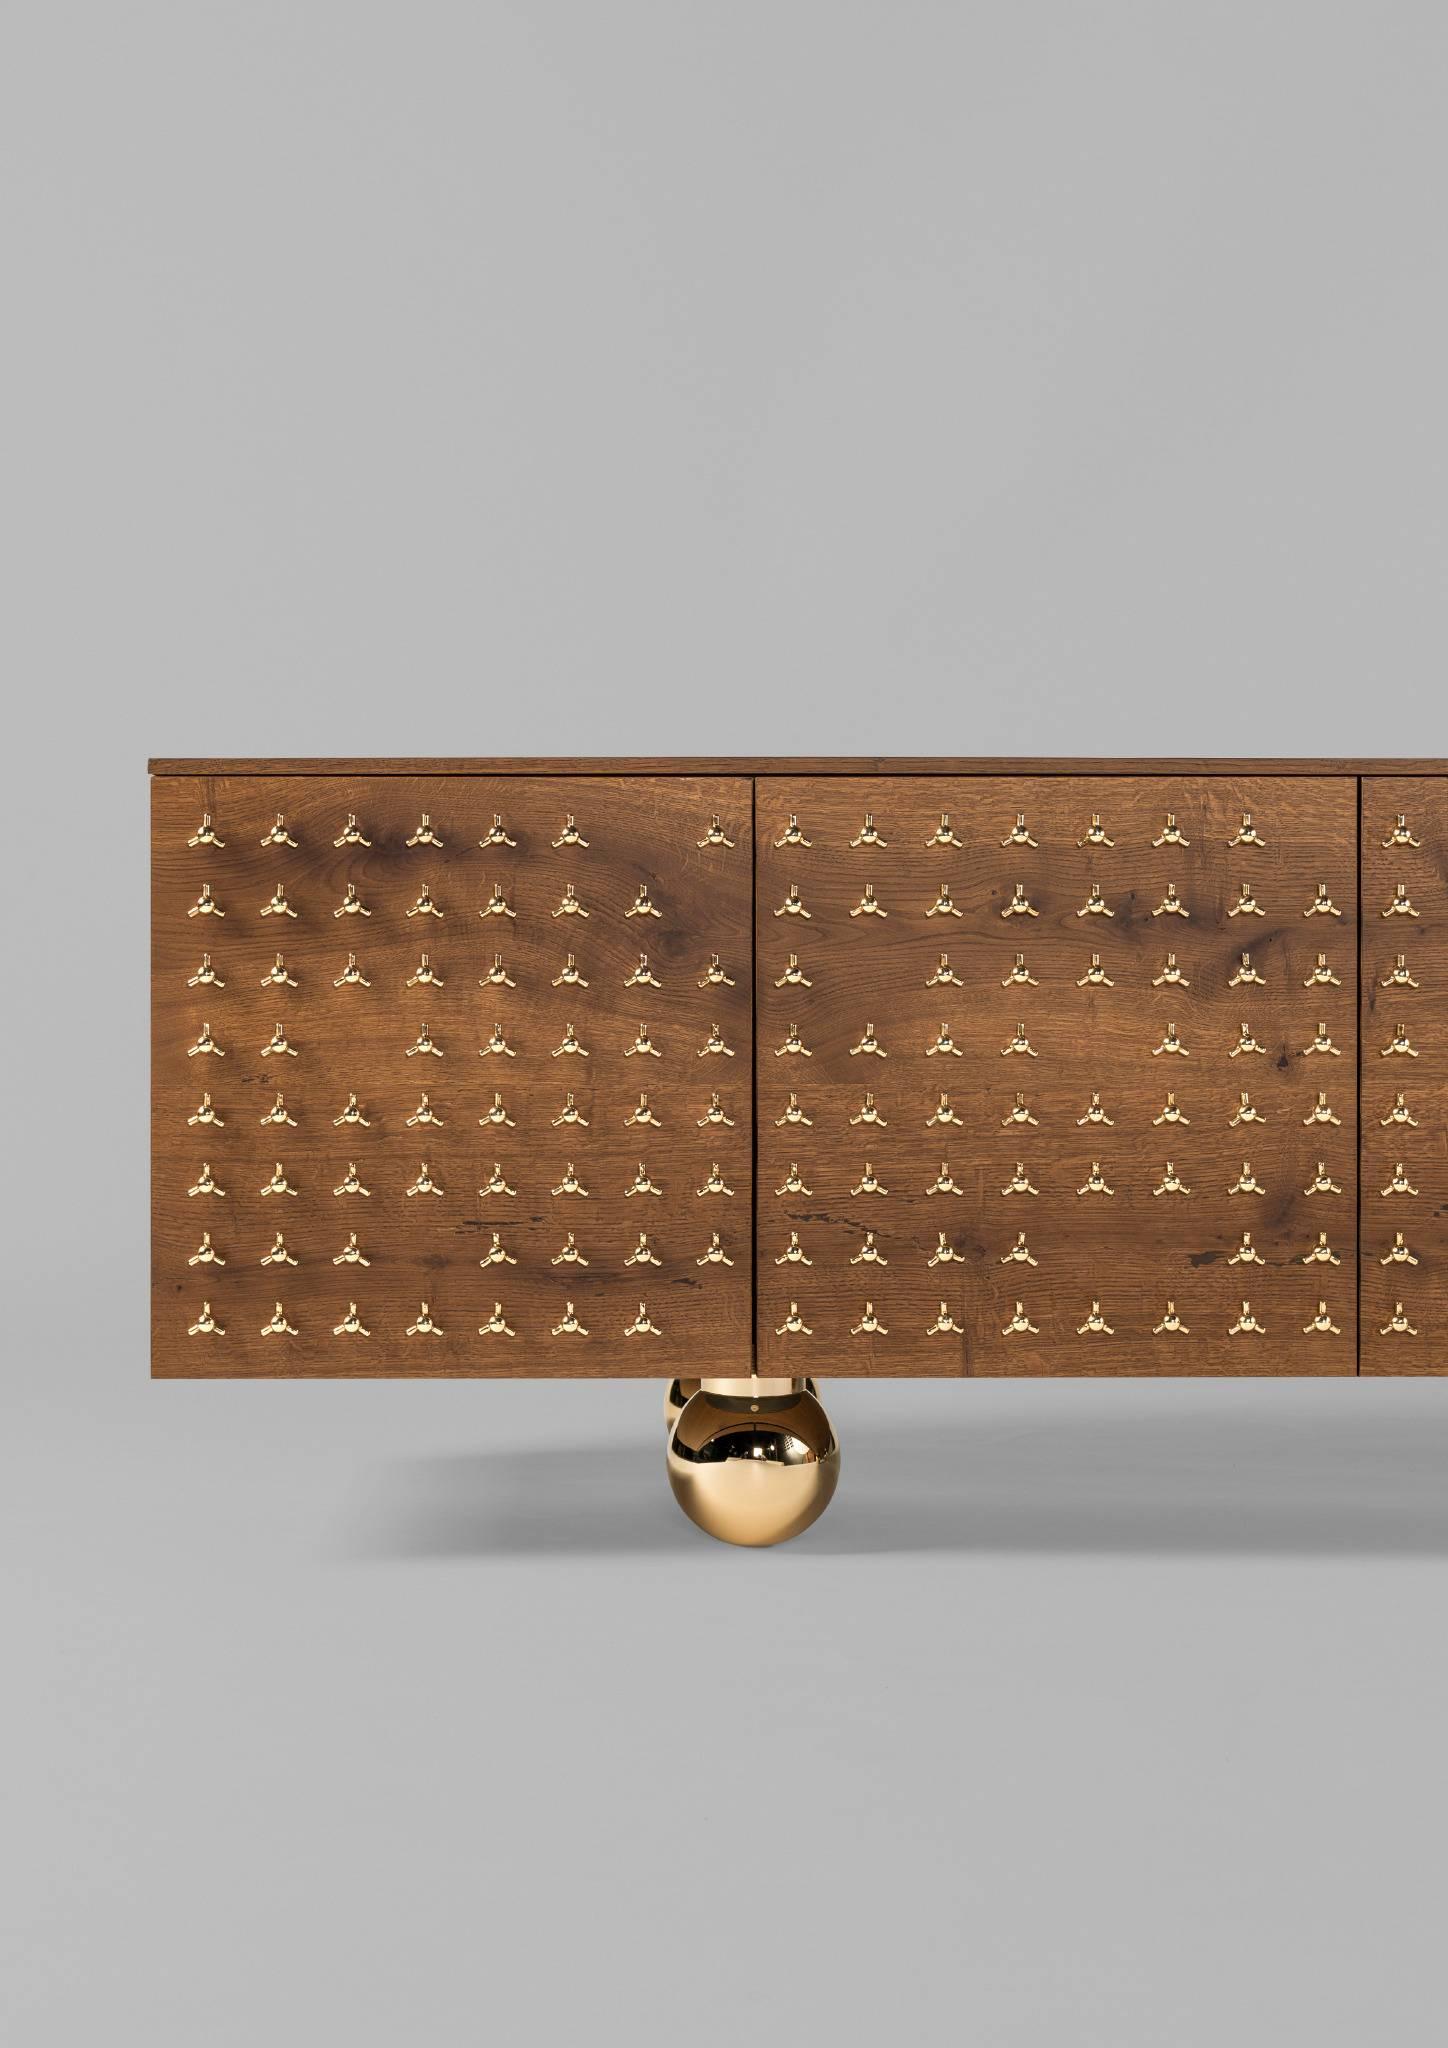 Remix cabinet designed by Ramon Ubeda.
Manufactured by BD.

Limited edition of 3.

Container, frontals and shelves veneered in natural stained dark oak. Legs in aluminium with a brass coat. Accessories in polished varnished brass. 

REcuperate,